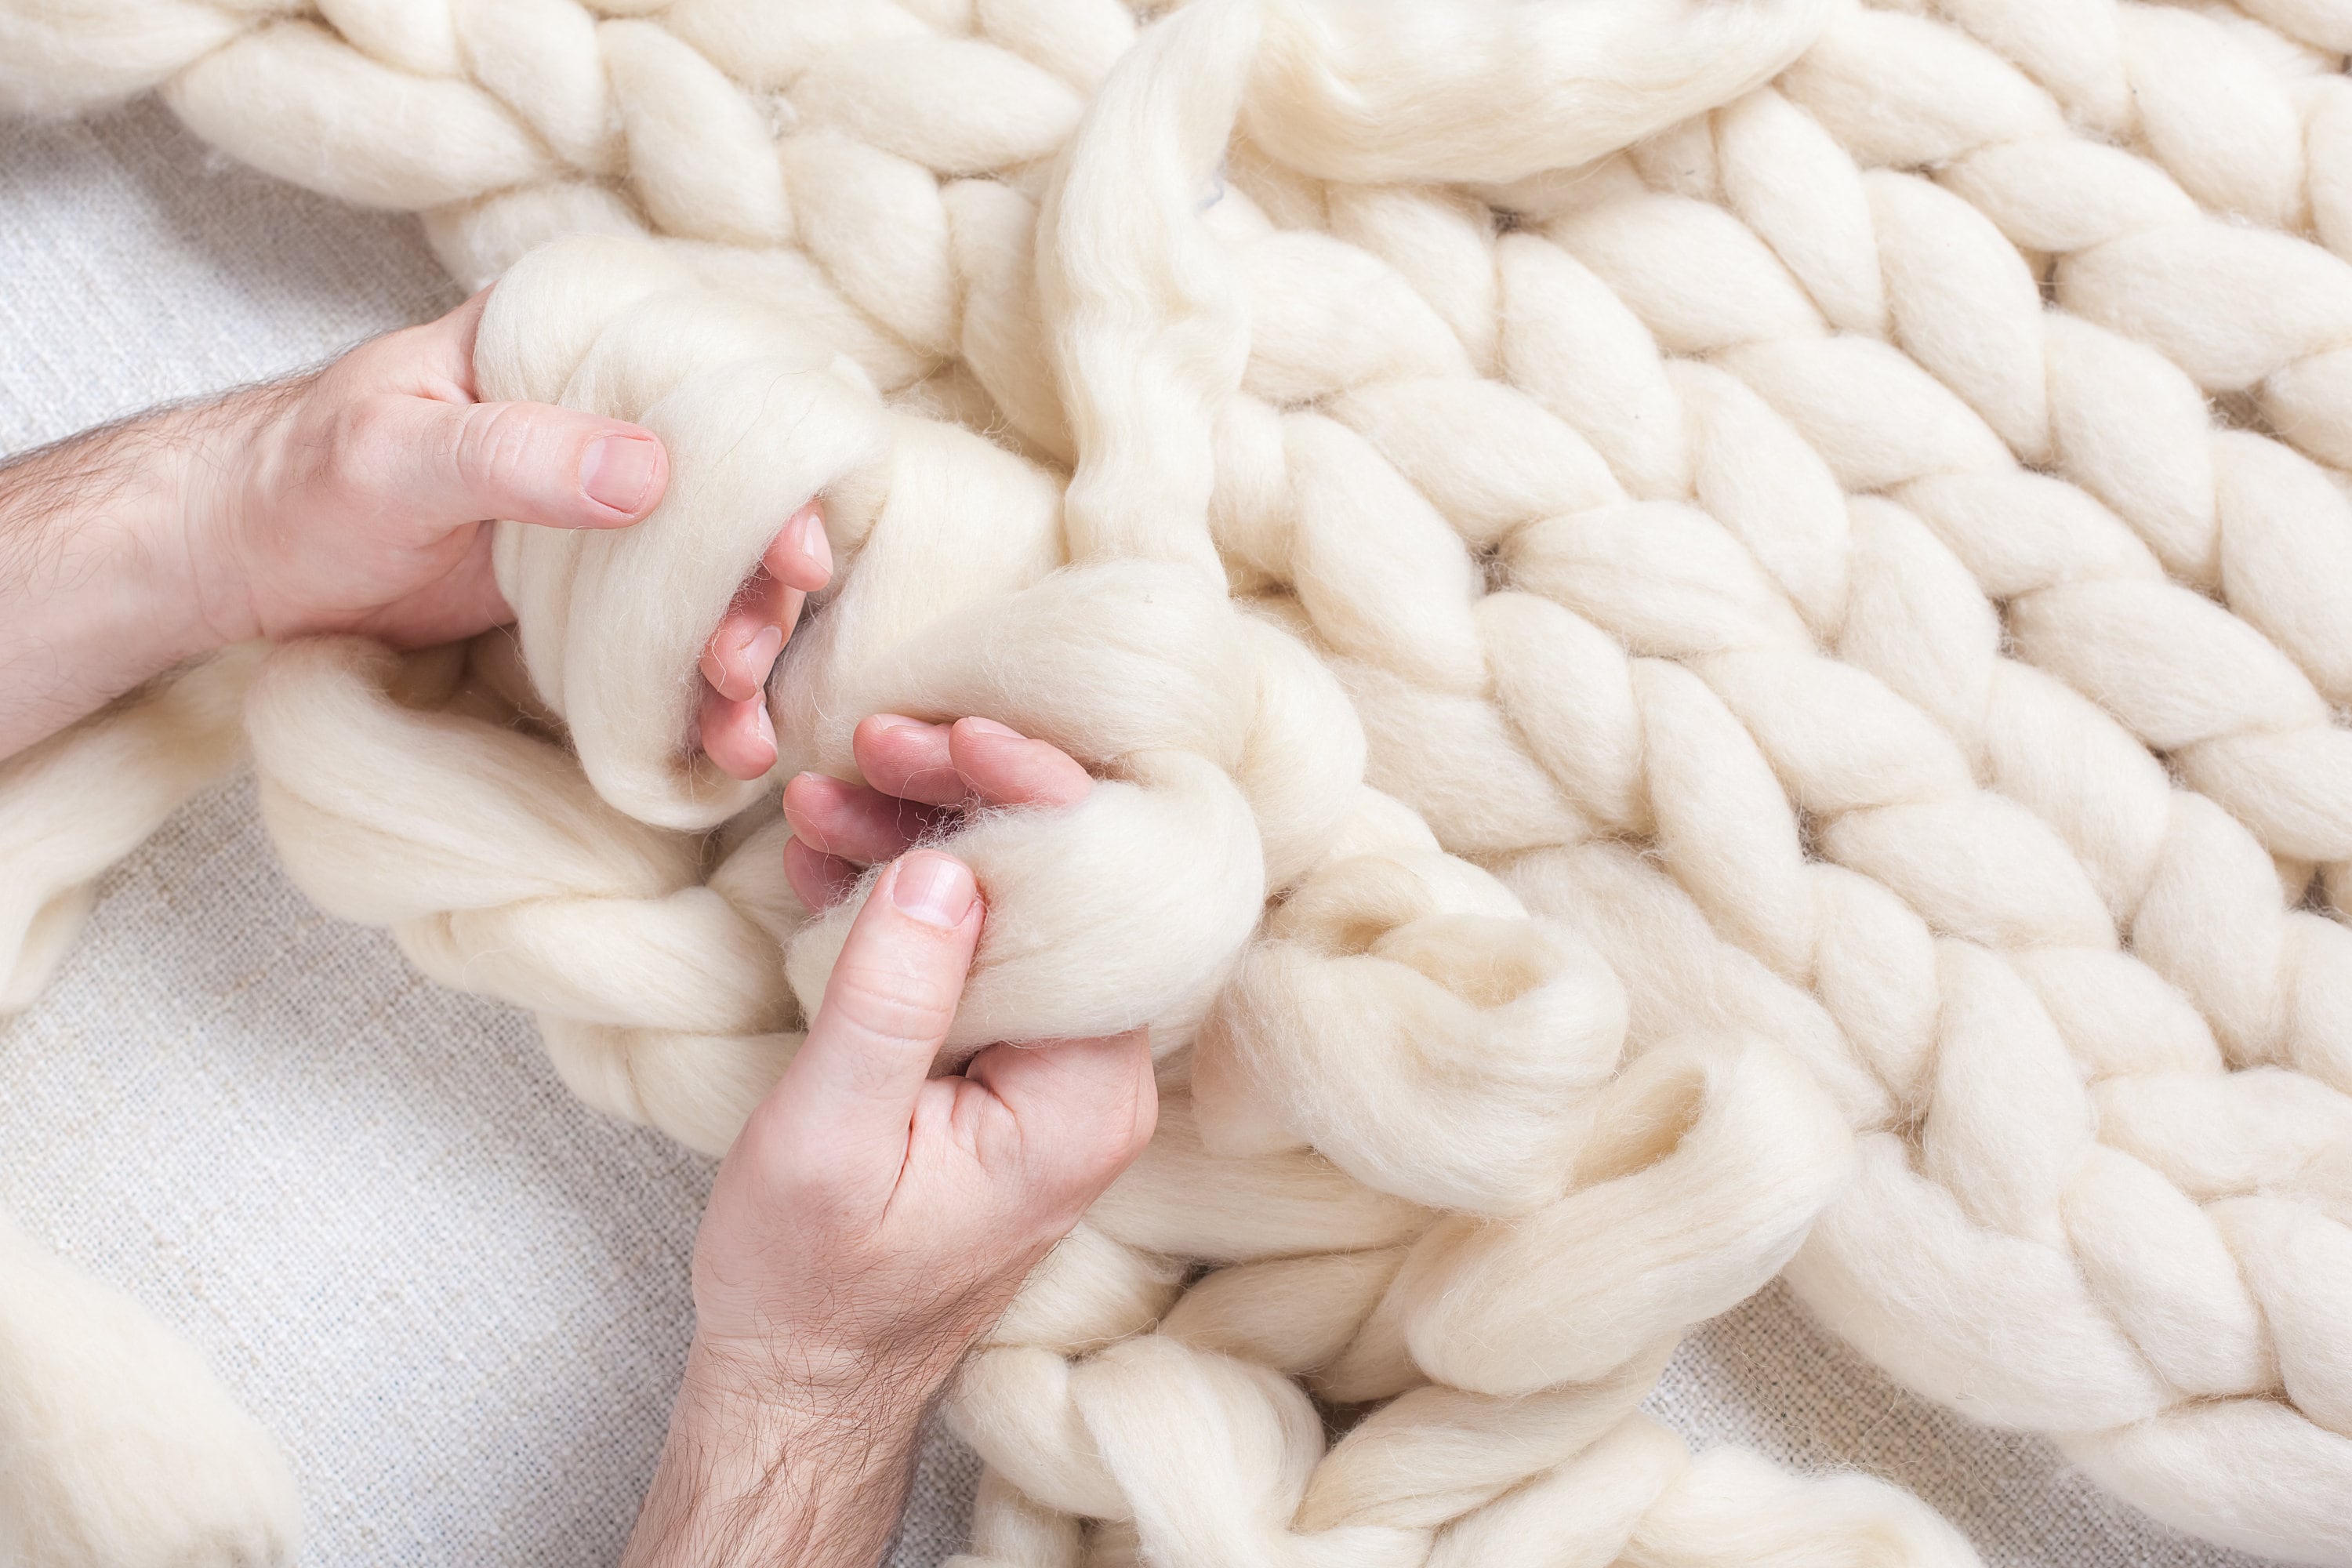 10 Lbs Pounds White Wool Top DIY Roving Fiber Spinning, Make Your Own  Felting Crafts Large Chunky arm or PVC Knit Throw Blanket USA sale 